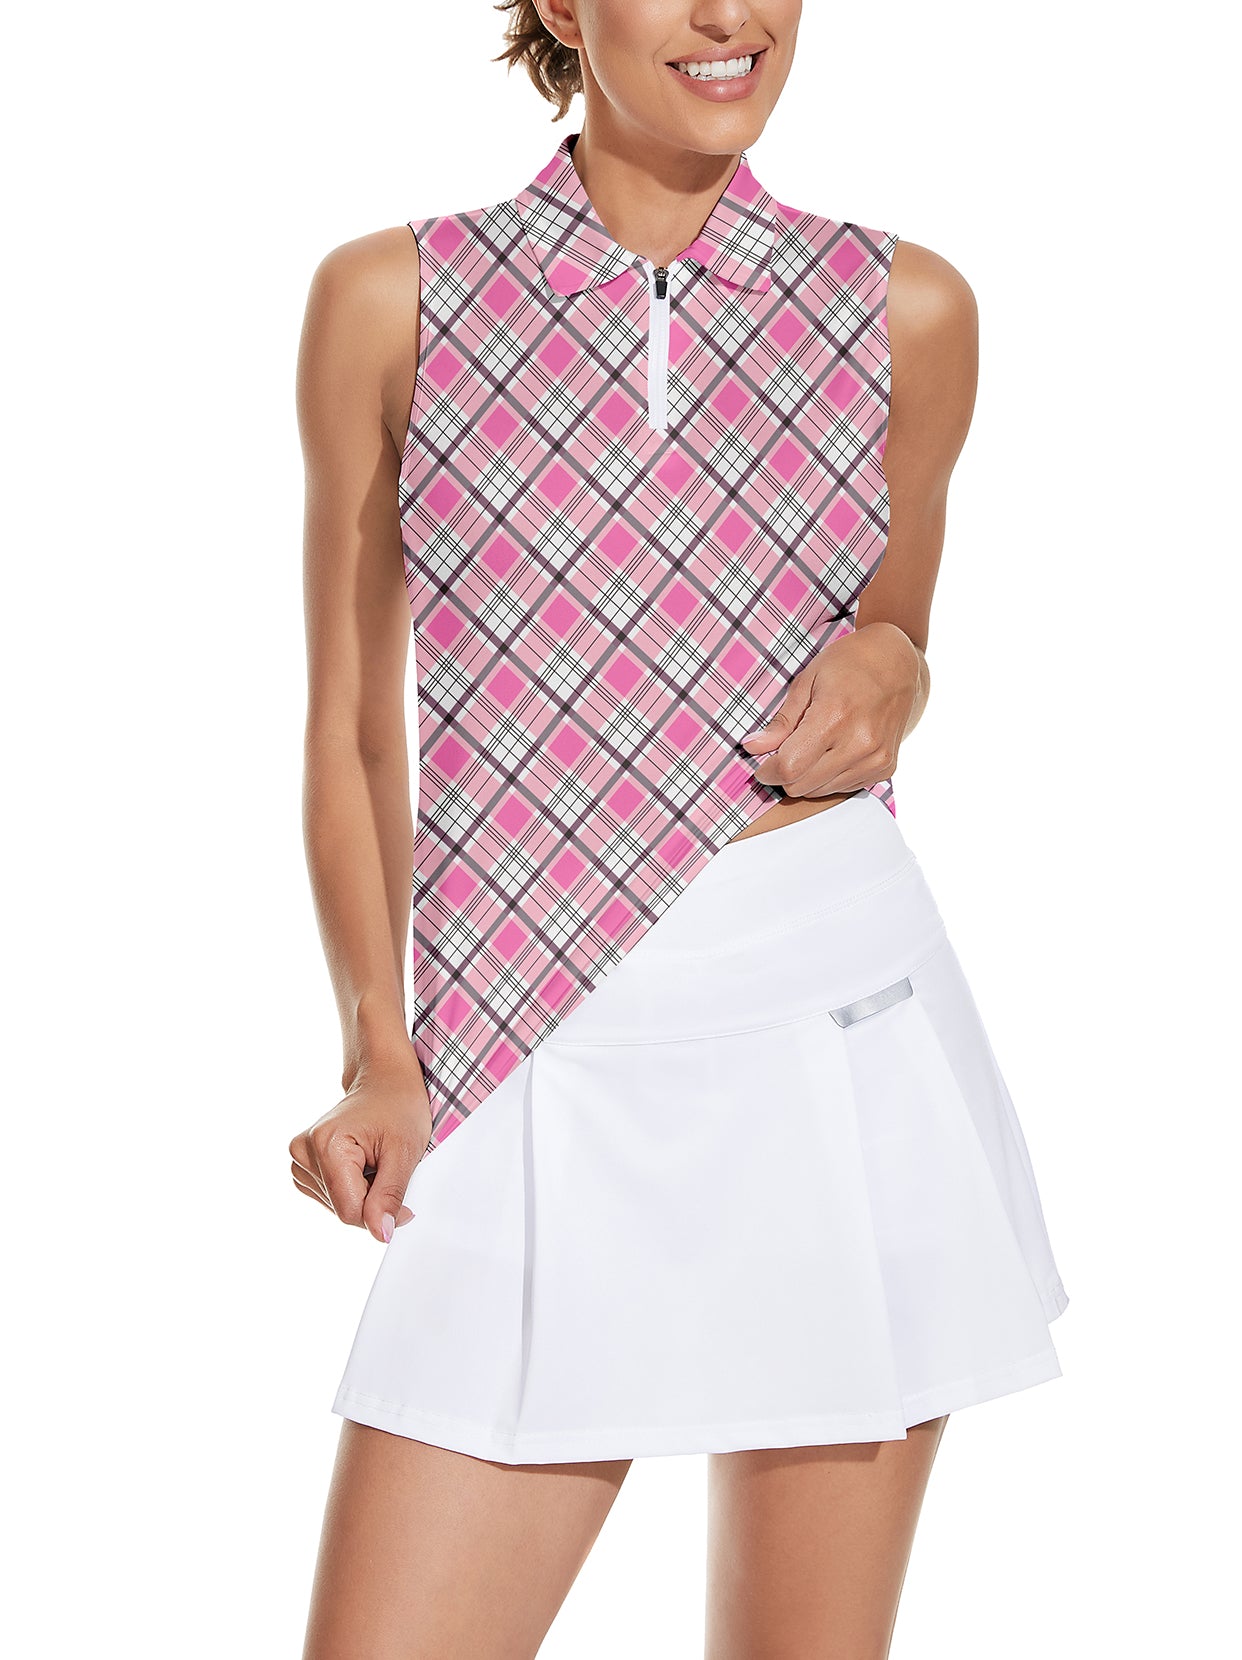 Soneven Ladies Golf Sleeveless Polo-💃🏼SO® Pink Checkerboard Athletic Polo Shirts Moisture Wicking Tennis Shirts Golf Shirts Dry Fit